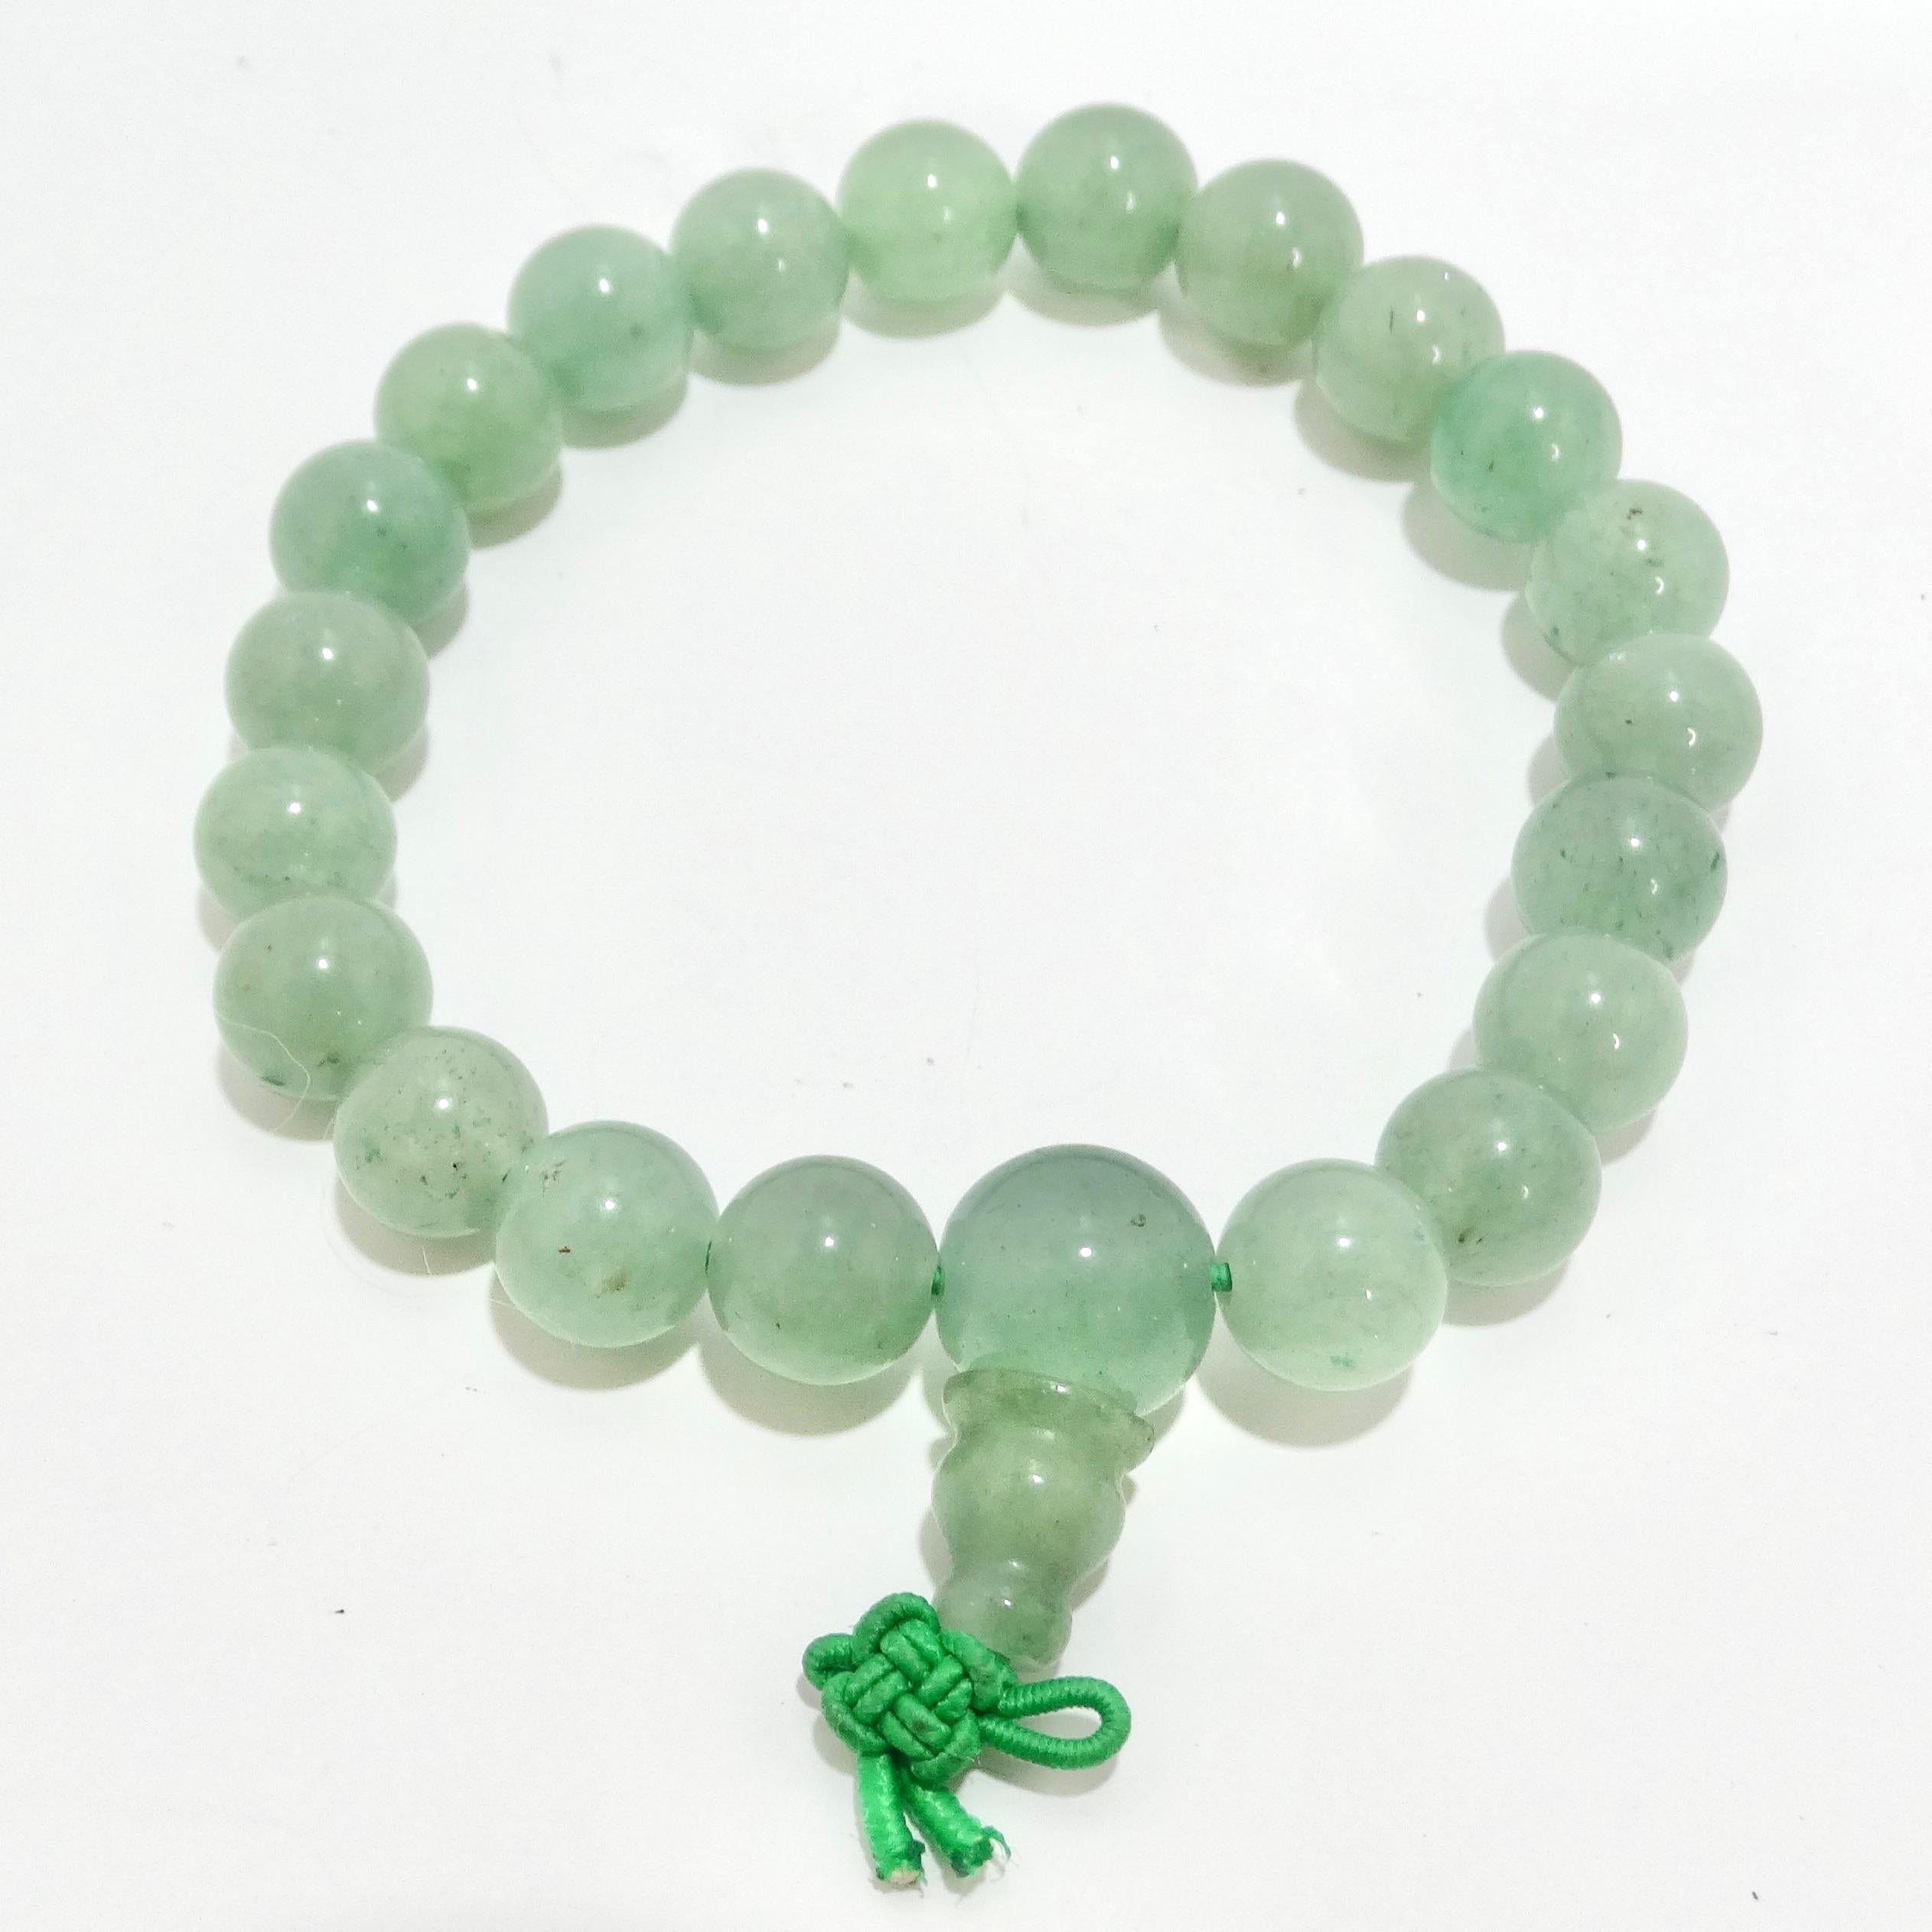 Adorn your wrist with the elegance of the 1970s Jade Jadeite Beaded Bracelet, a timeless piece that radiates natural beauty and sophistication. This Chinese jade malà bracelet showcases stunning jade ball-shaped beads, strung on a stretchy green